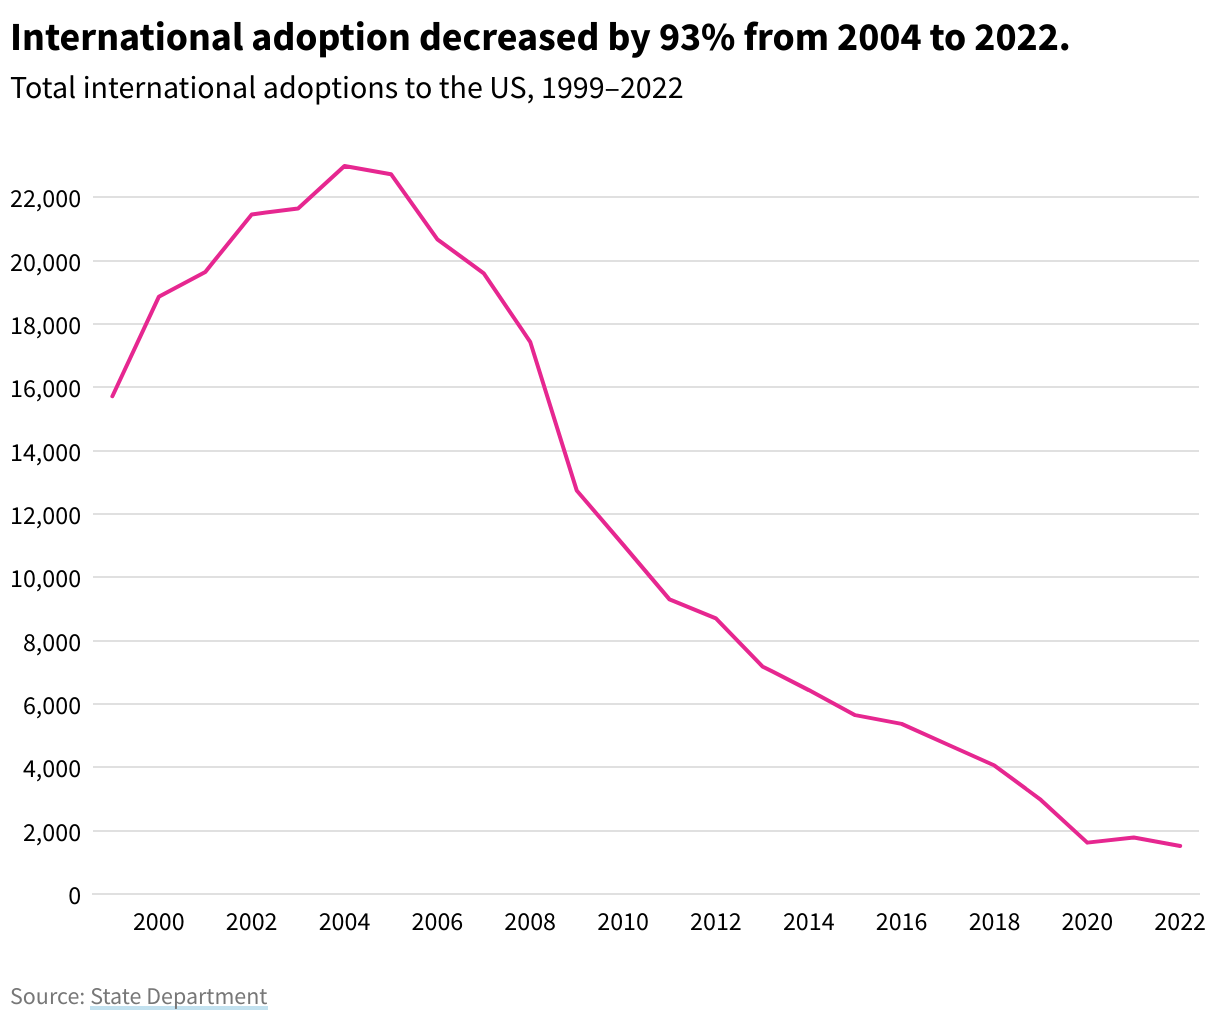 A line chart showing the number of international adoptions by year from 1999 to 2022. The line peaks in 2004 before declining for 17 of the next 18 years.